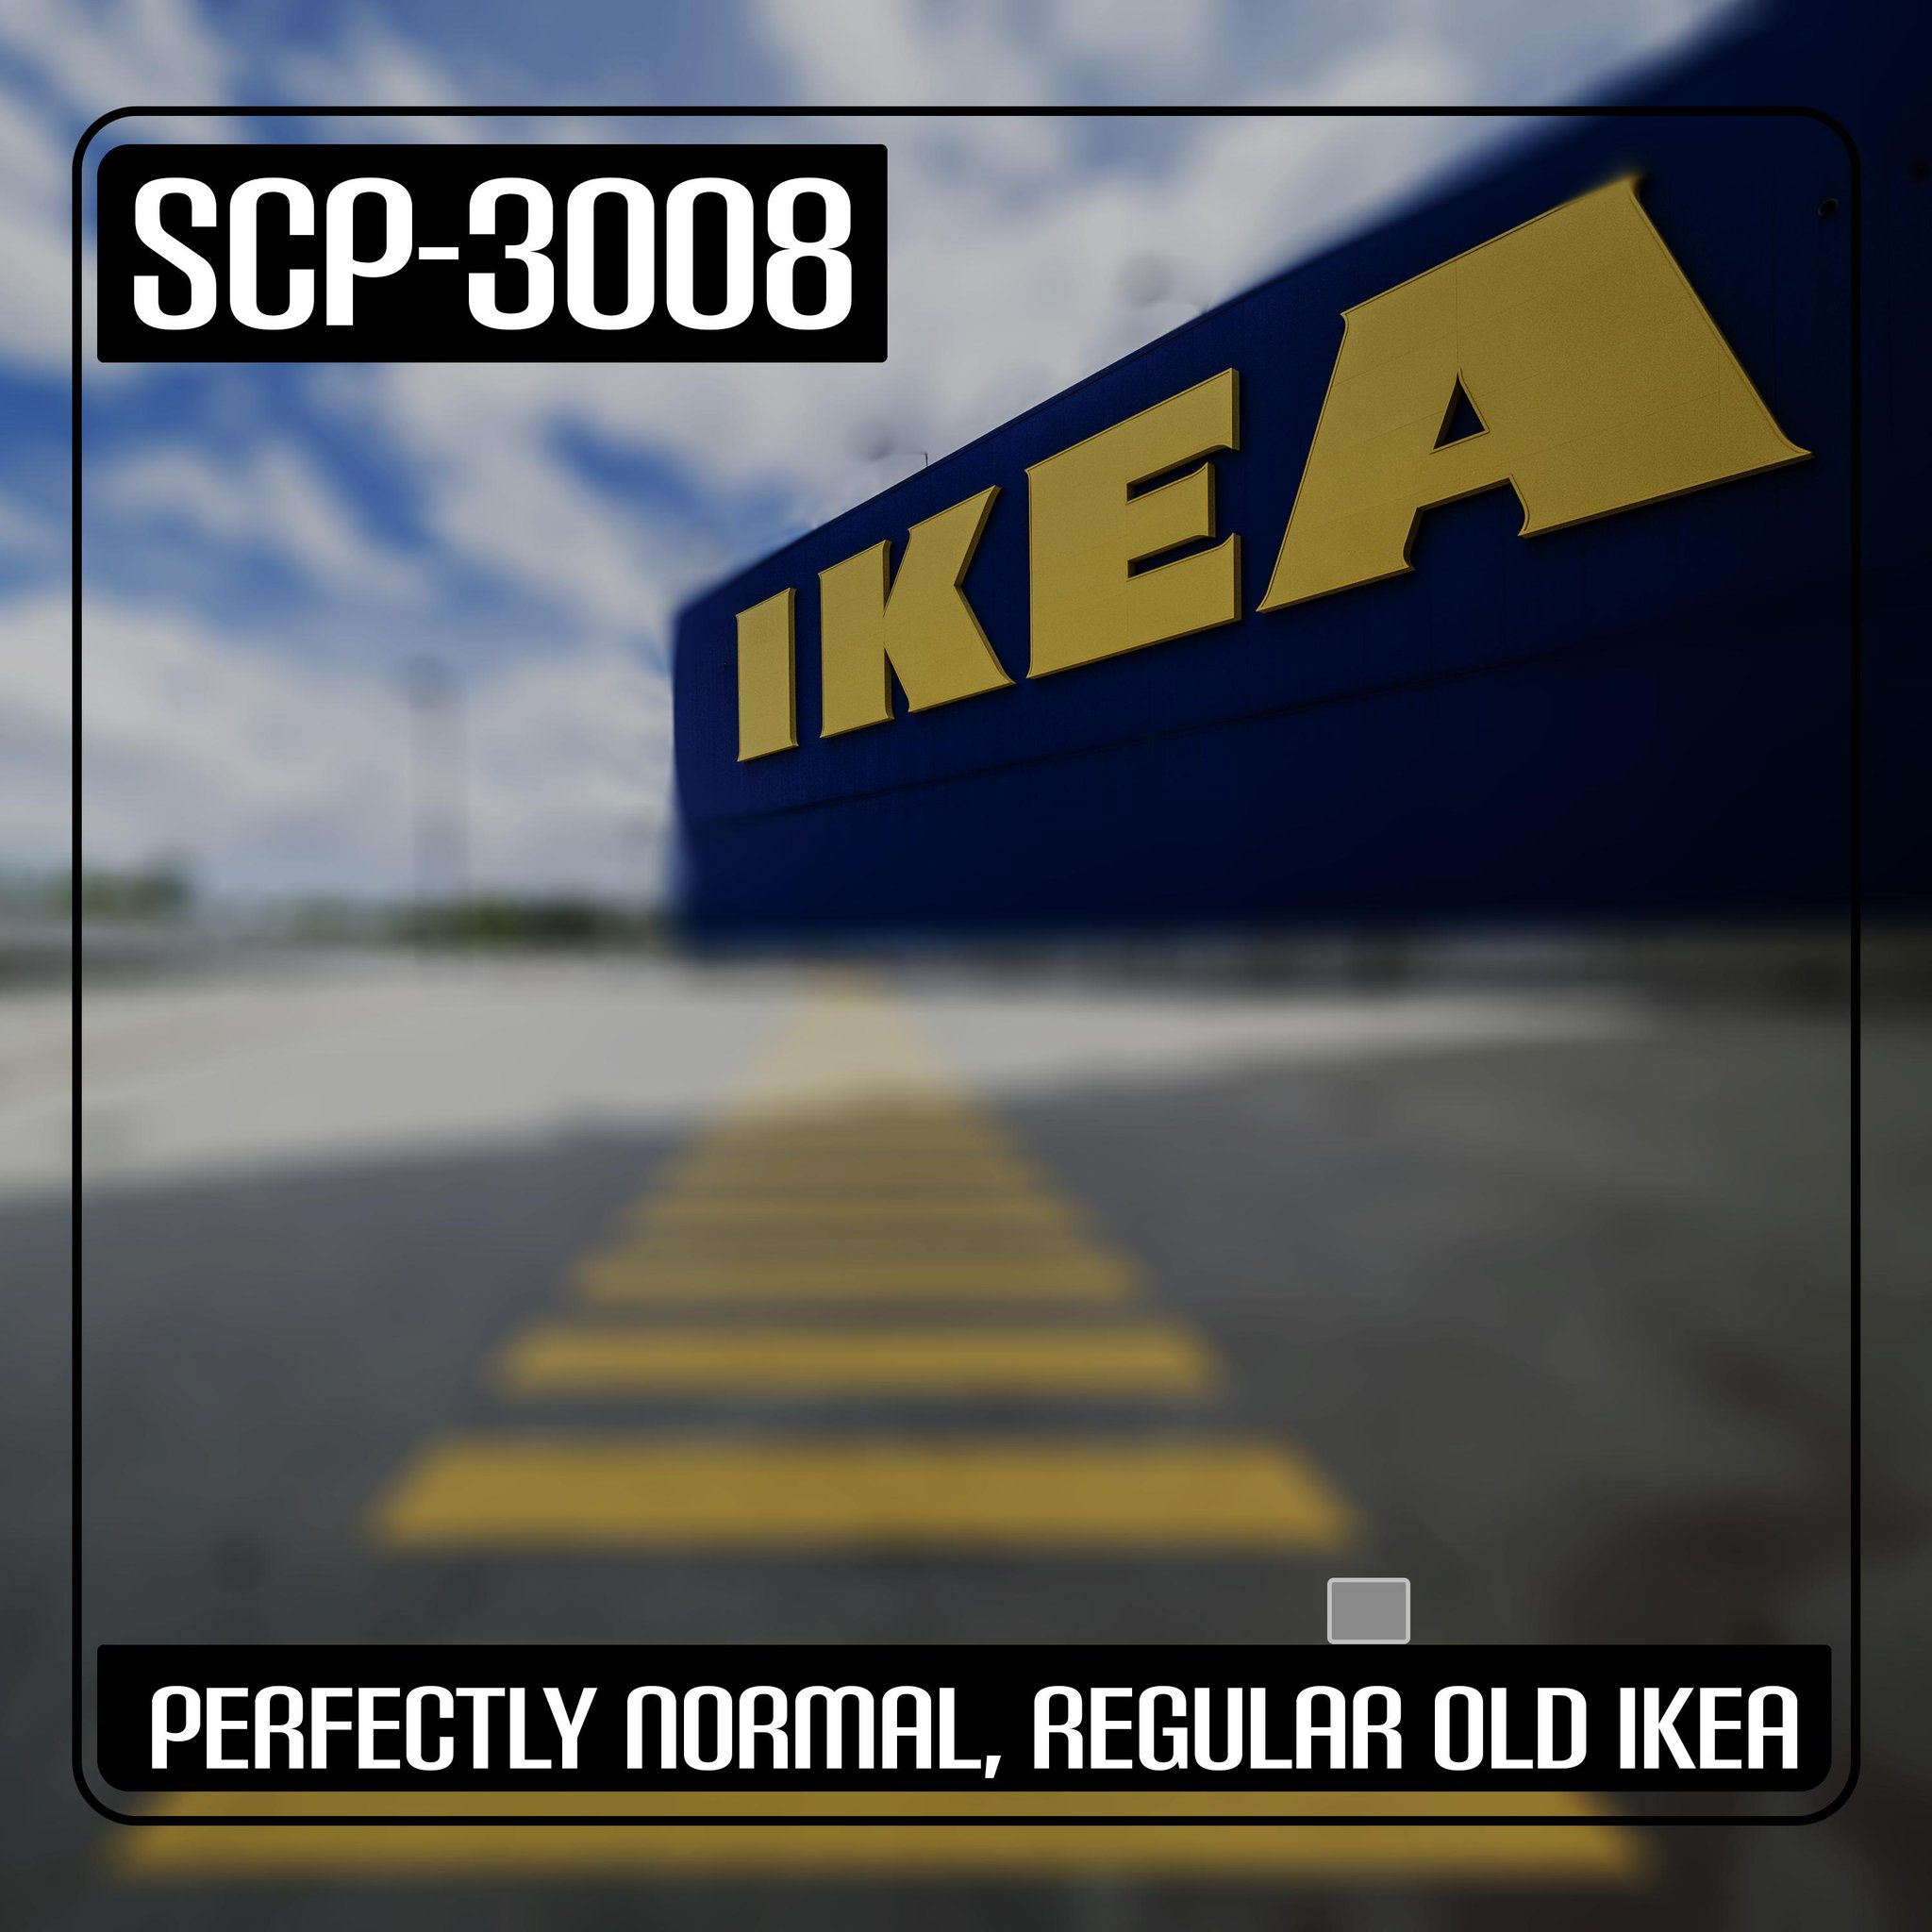 Podcast Take A Trip To A Perfectly Normal Ikea In Scp 3008 Bloody Disgusting